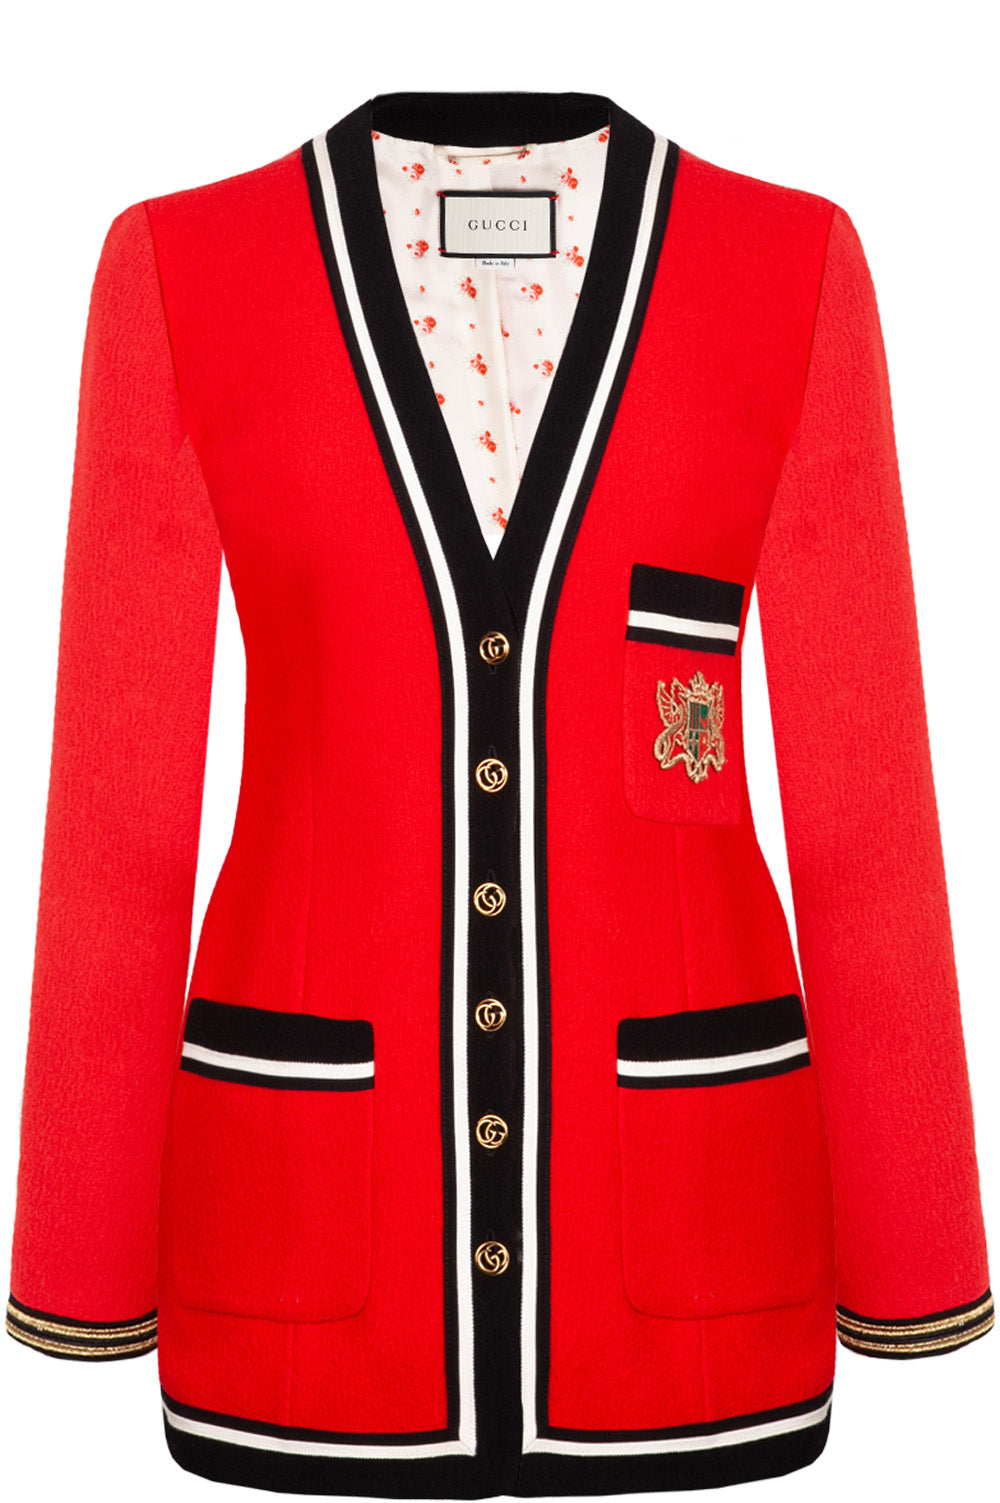 GUCCI Jacket Red